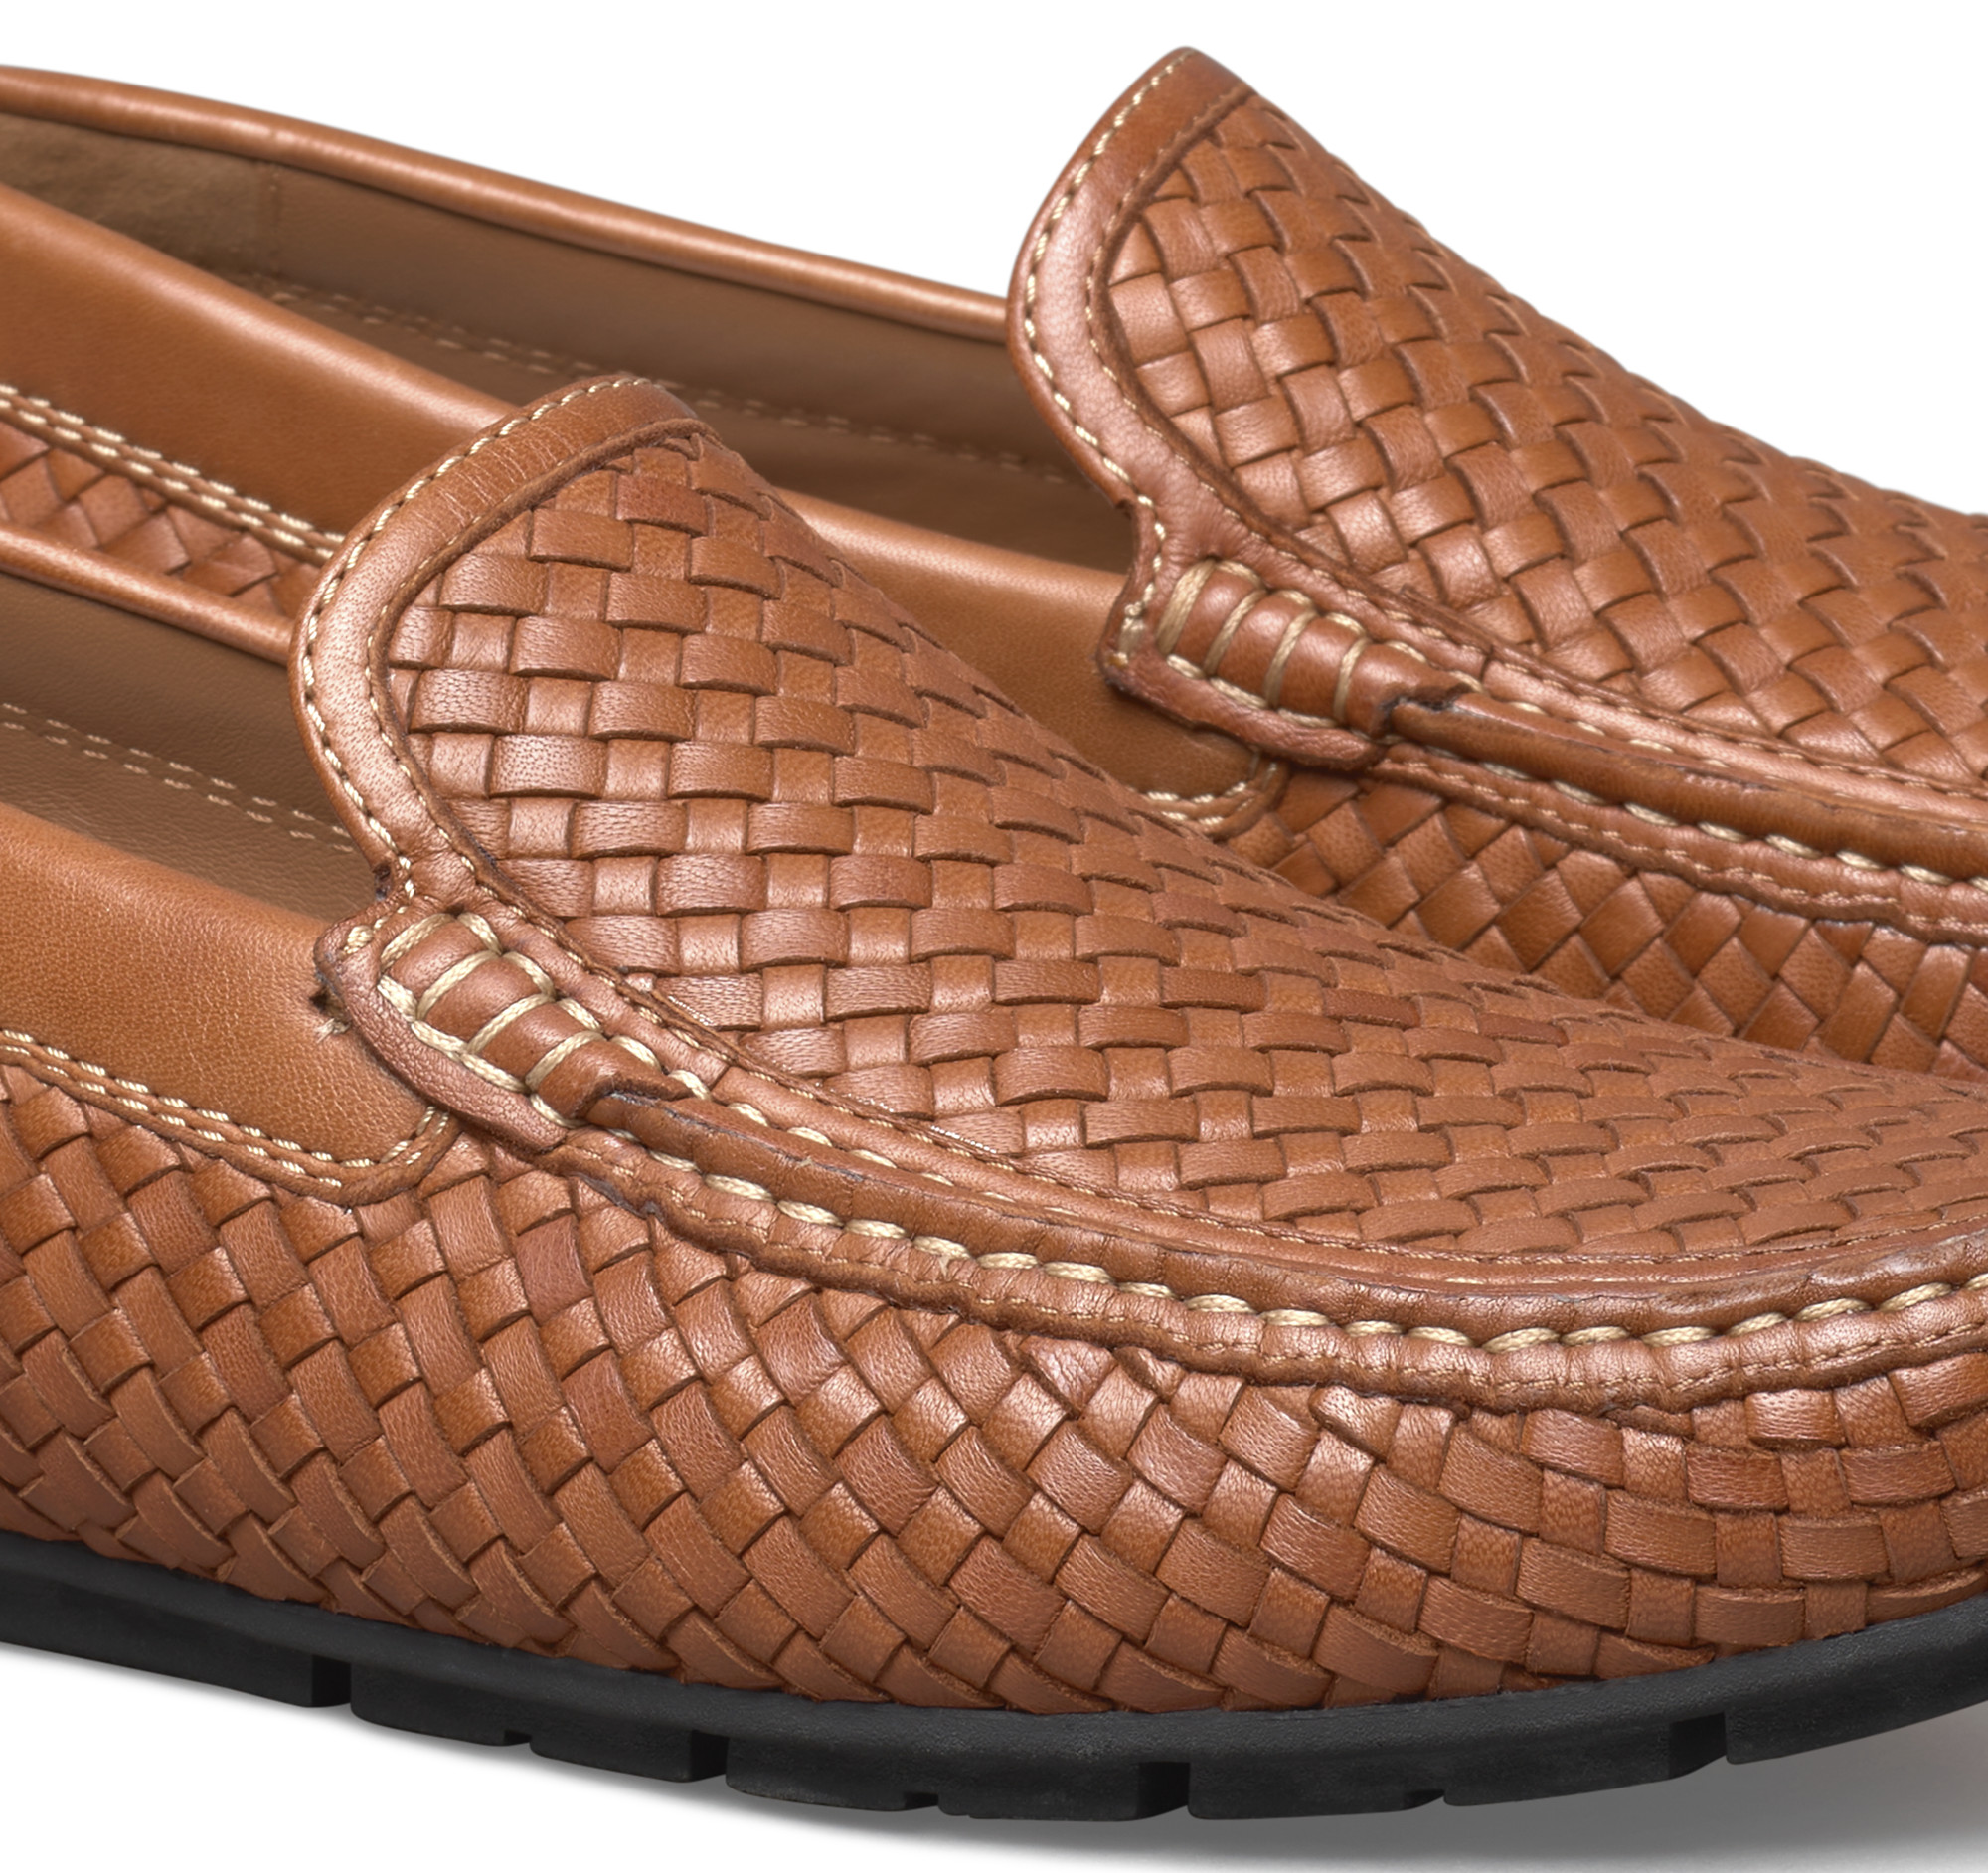 Baldwin Driver Woven Slip-On image number null